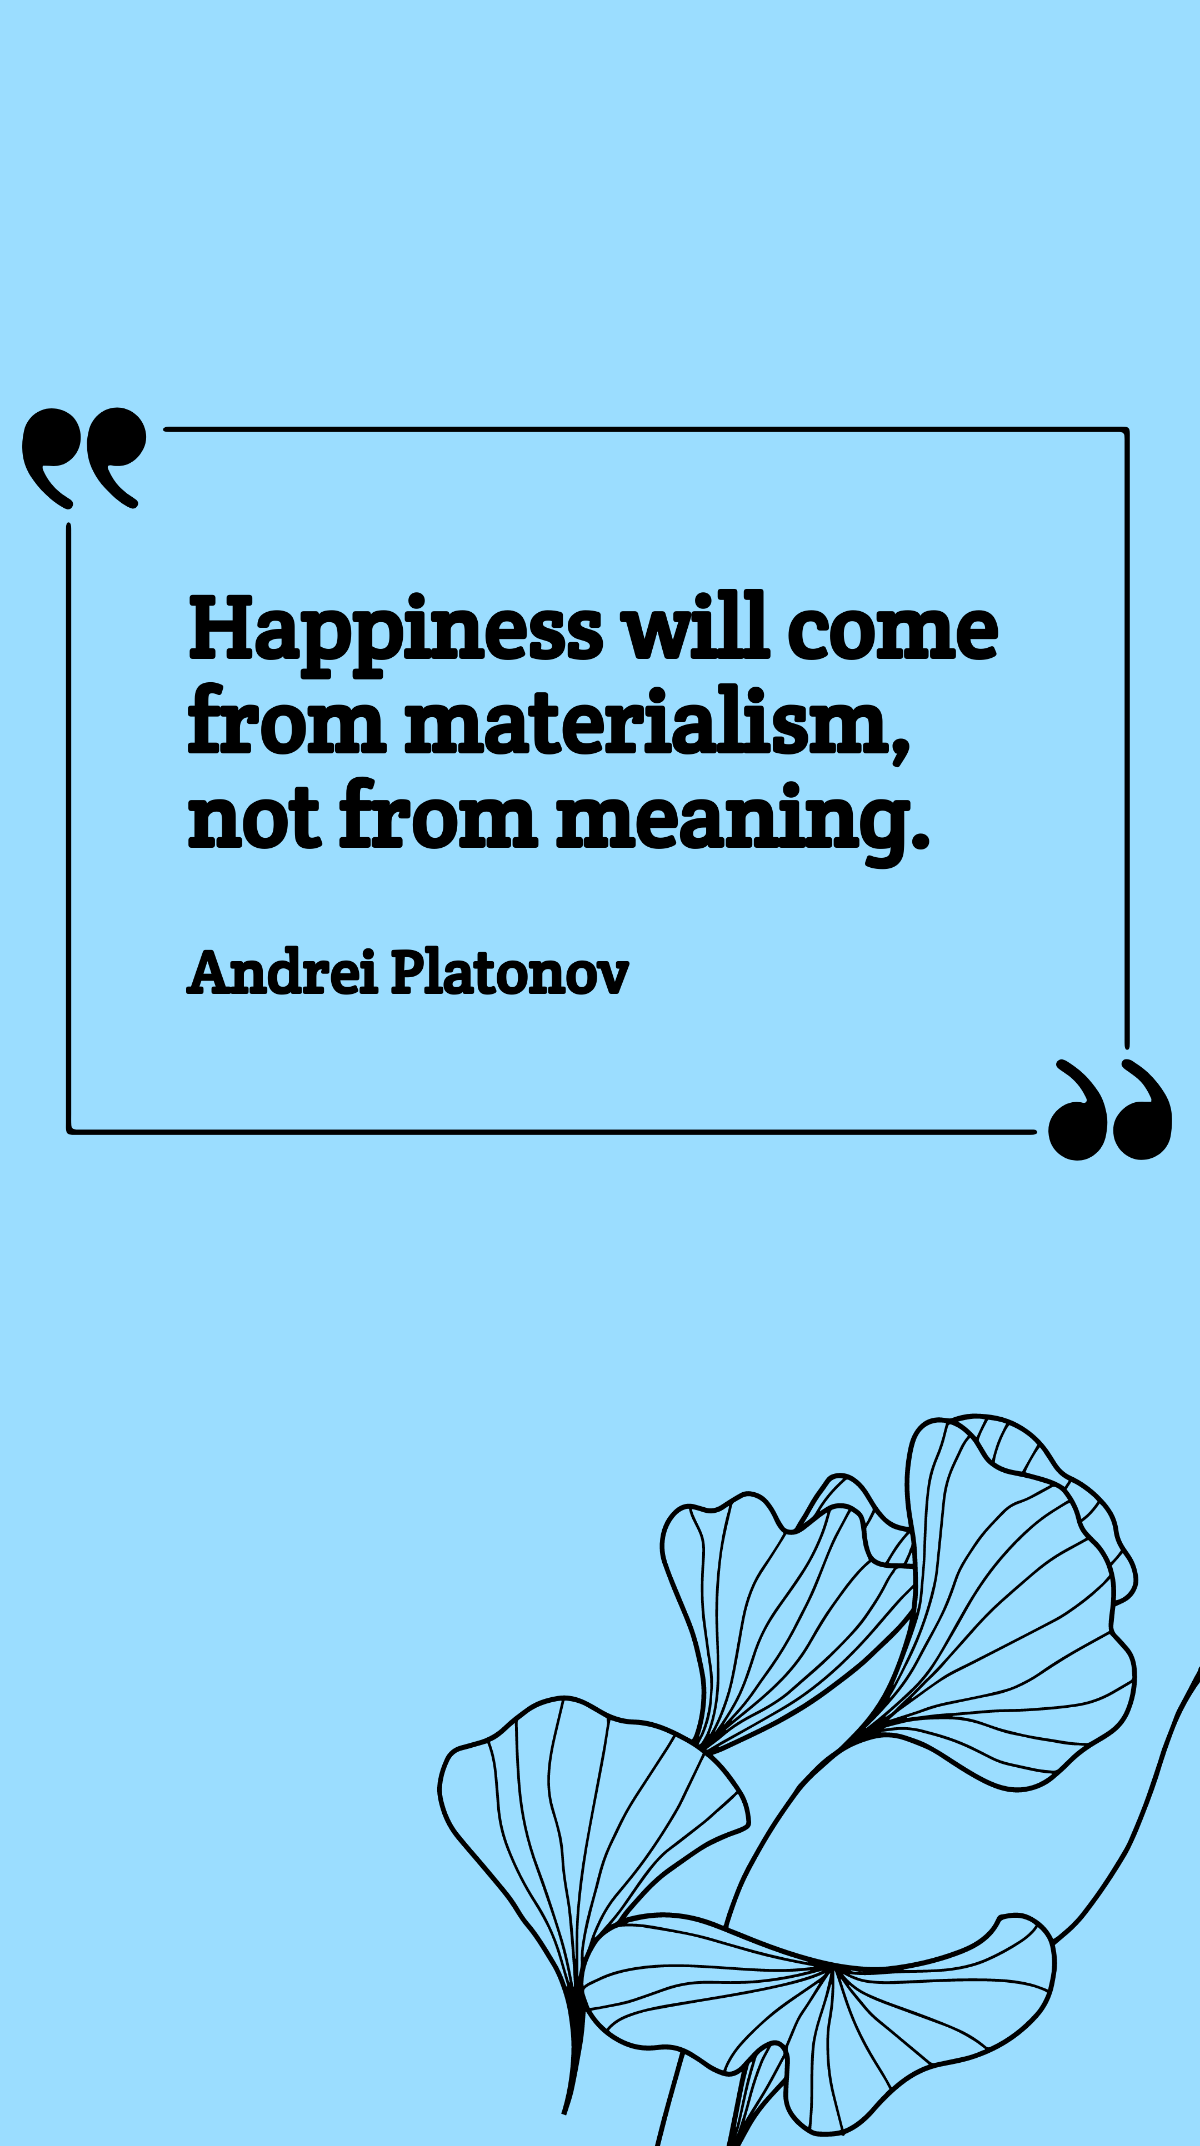 Andrei Platonov - Happiness will come from materialism, not from meaning. Template